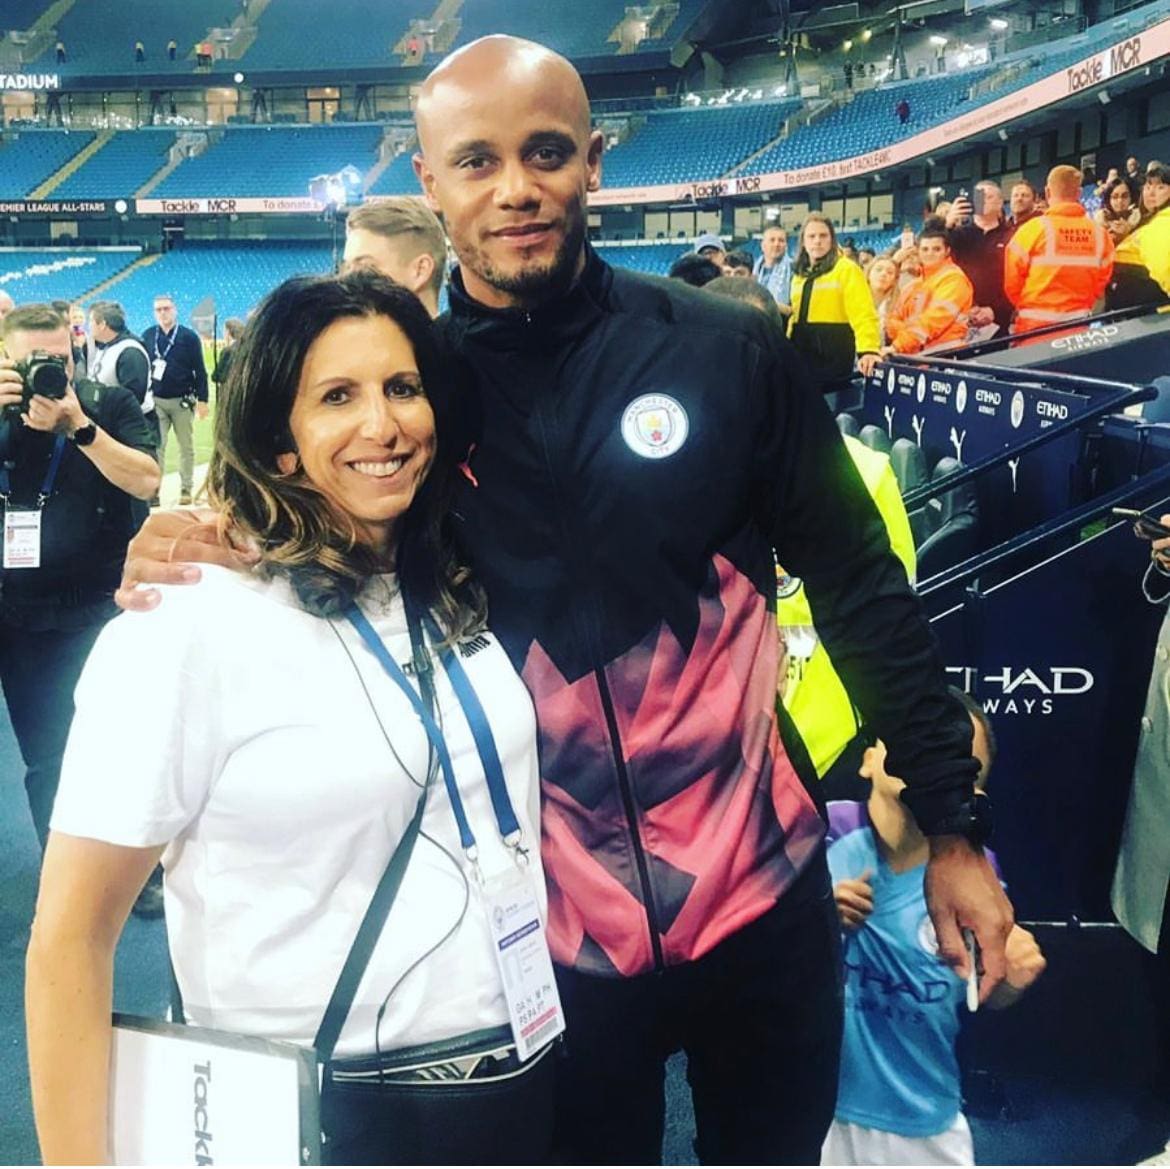 Laura Wolfe and MCFC player Vincent Kompany